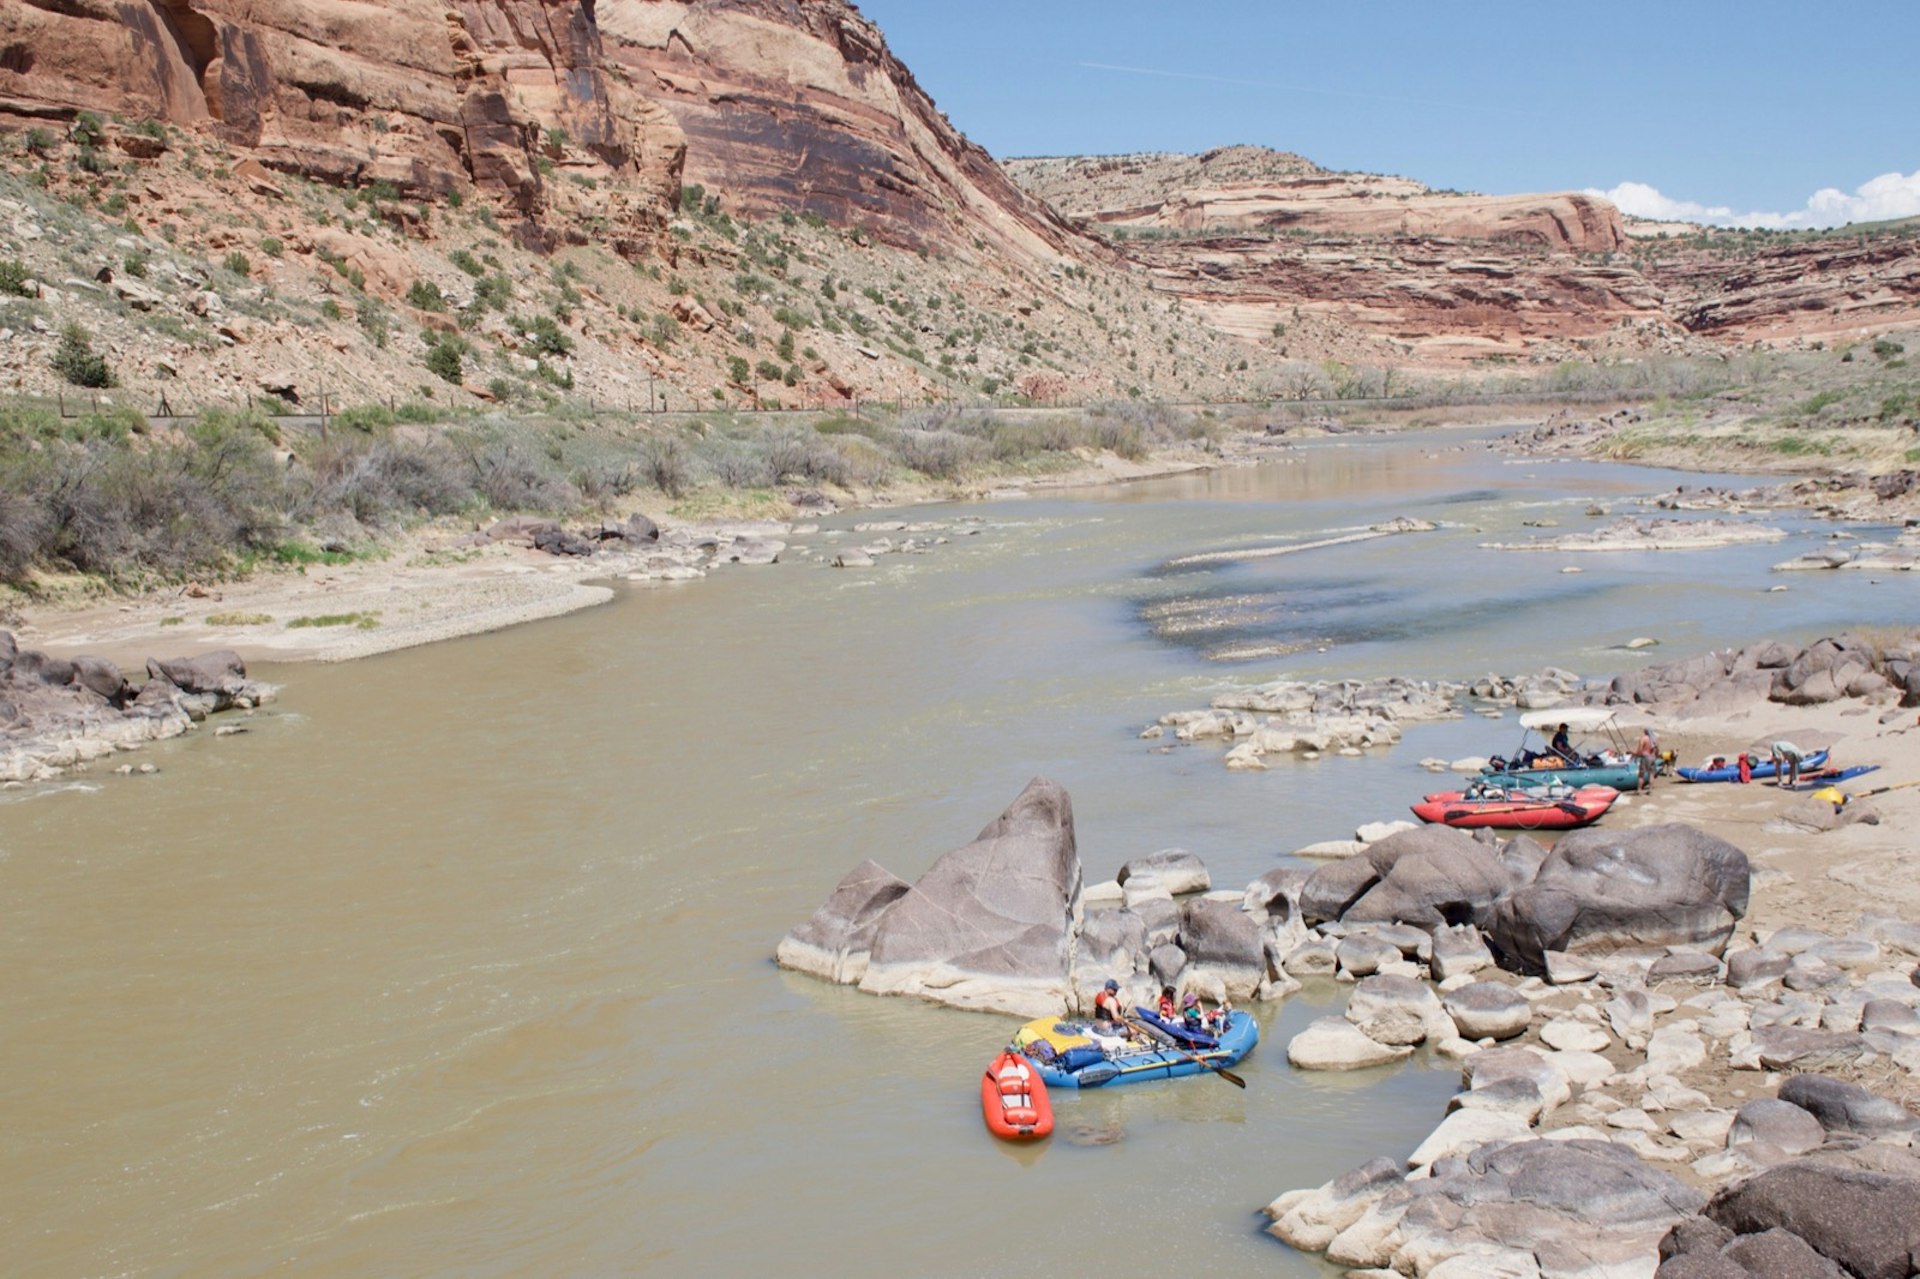 Several rafts are arranged along the banks of a fairly calm river in the southwest, with dusty hills rising beyond.